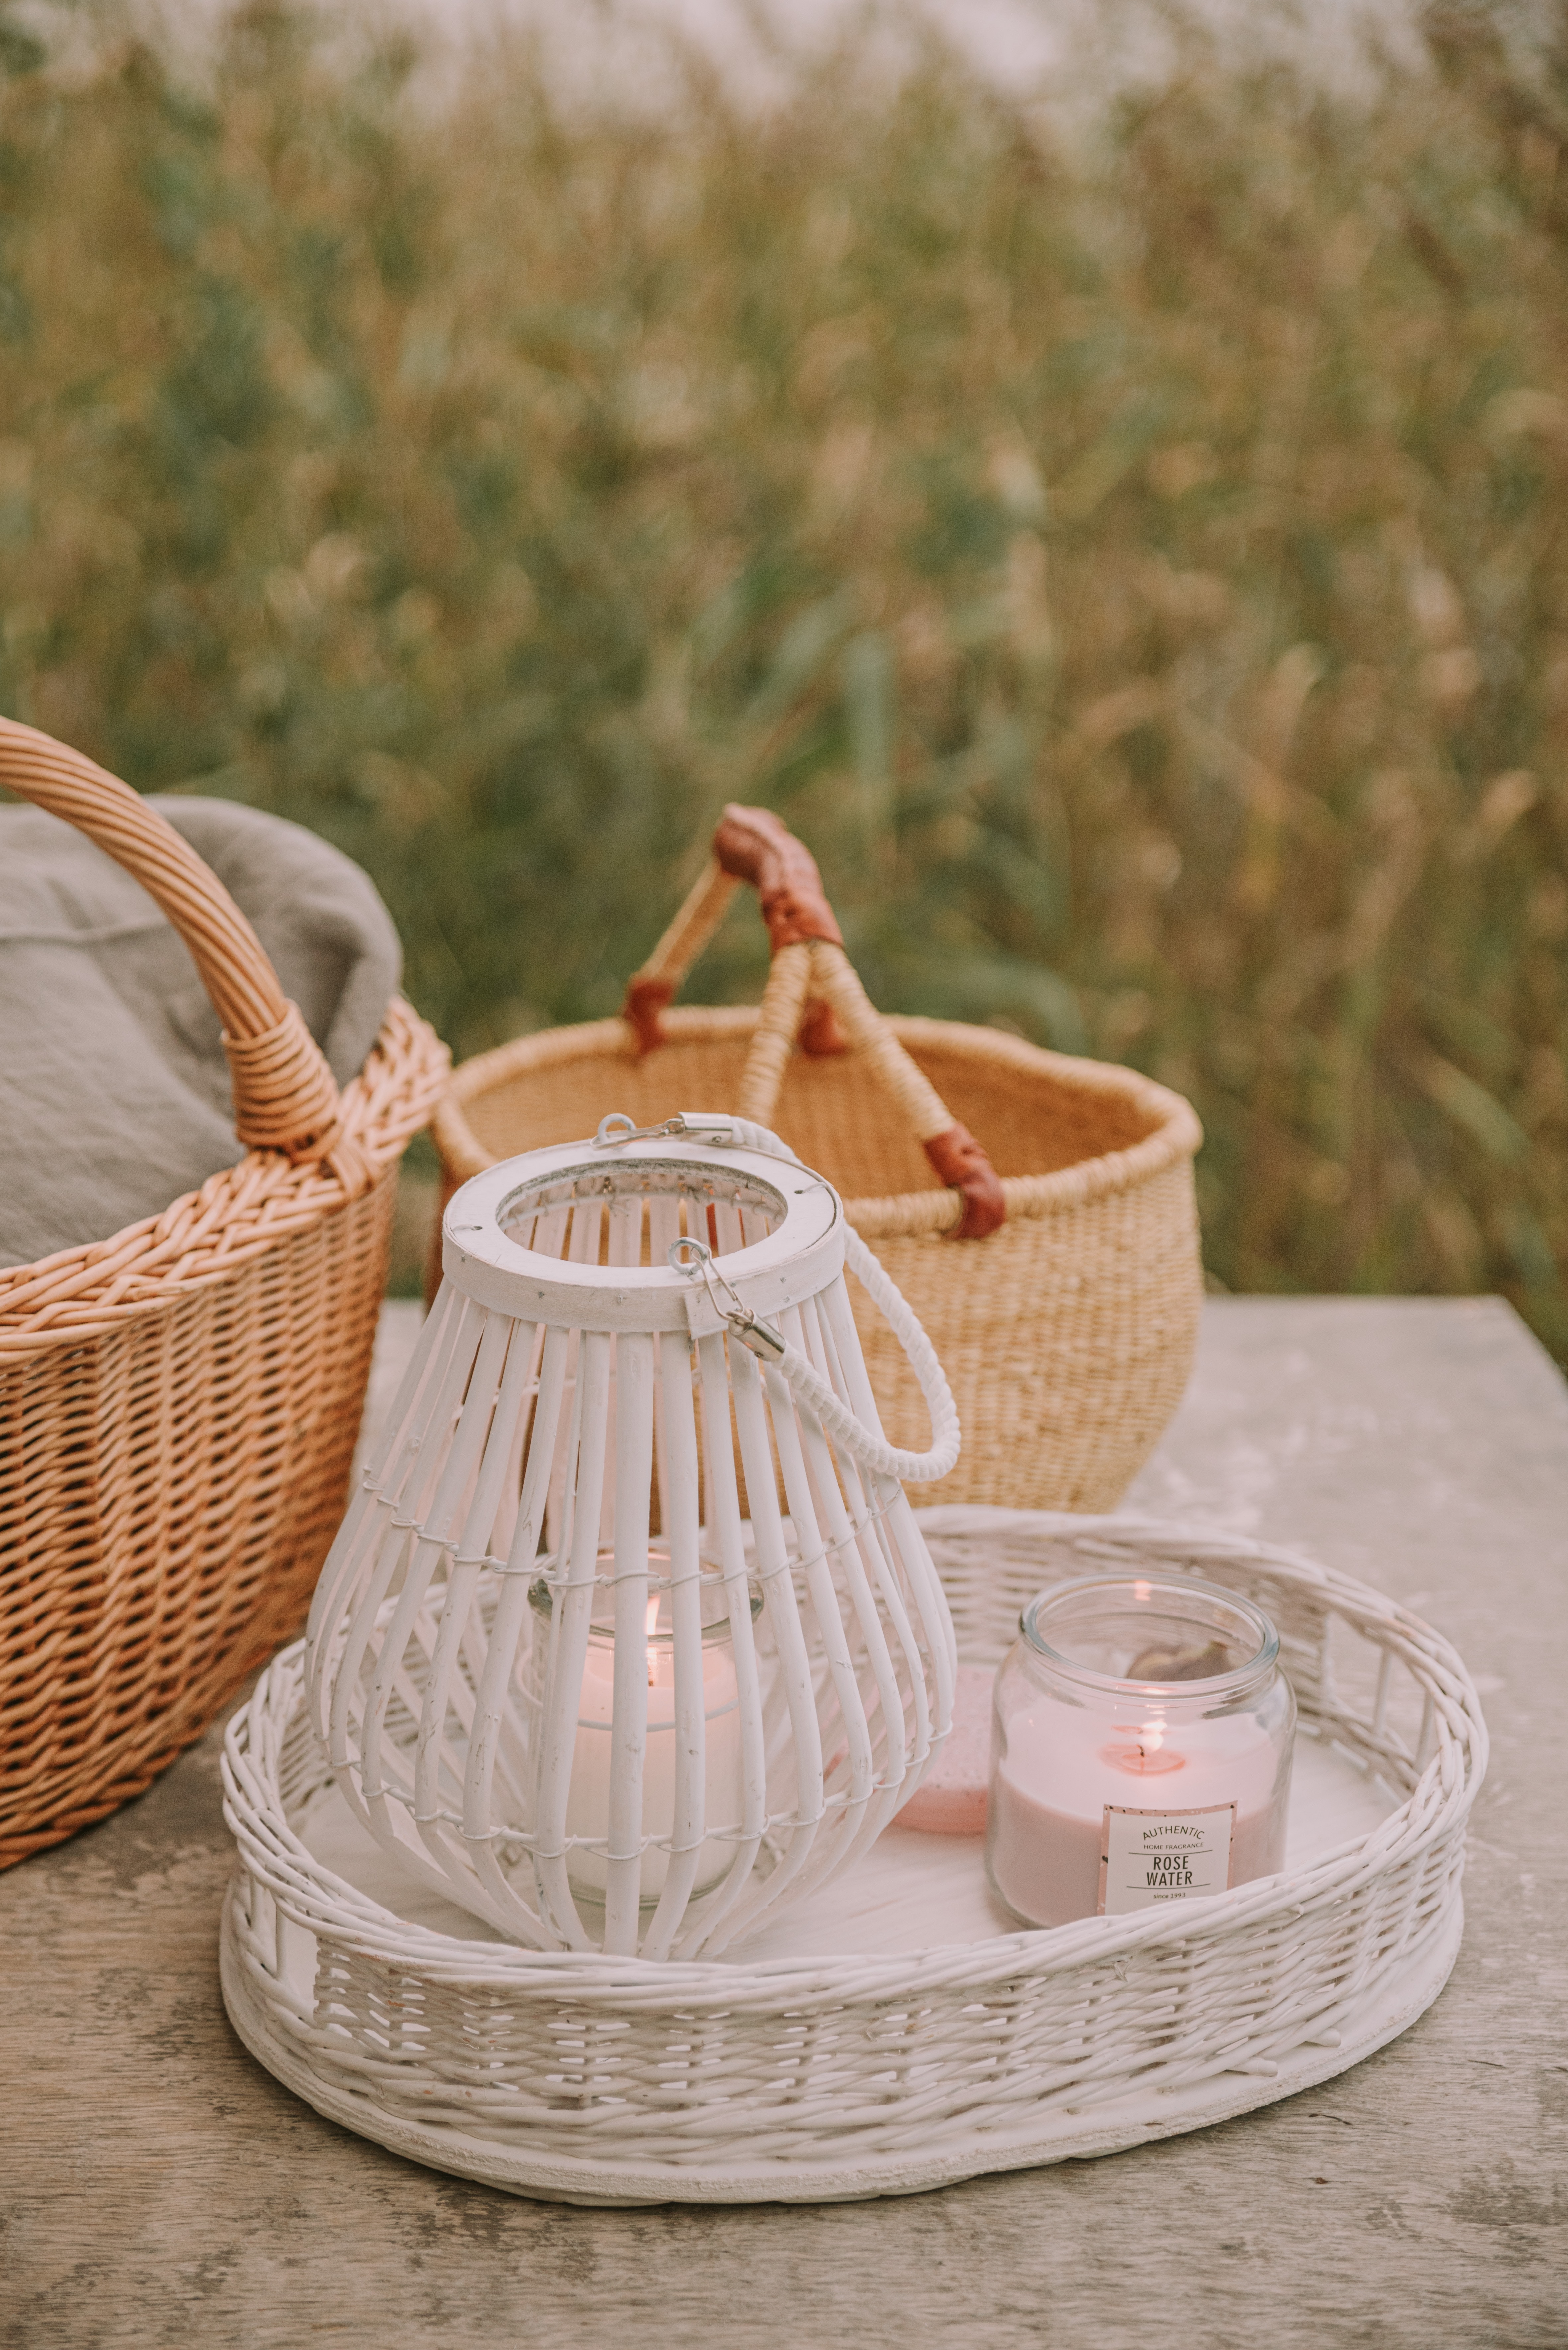 food, candles, wood, wooden, basket, wicker, braided, banks